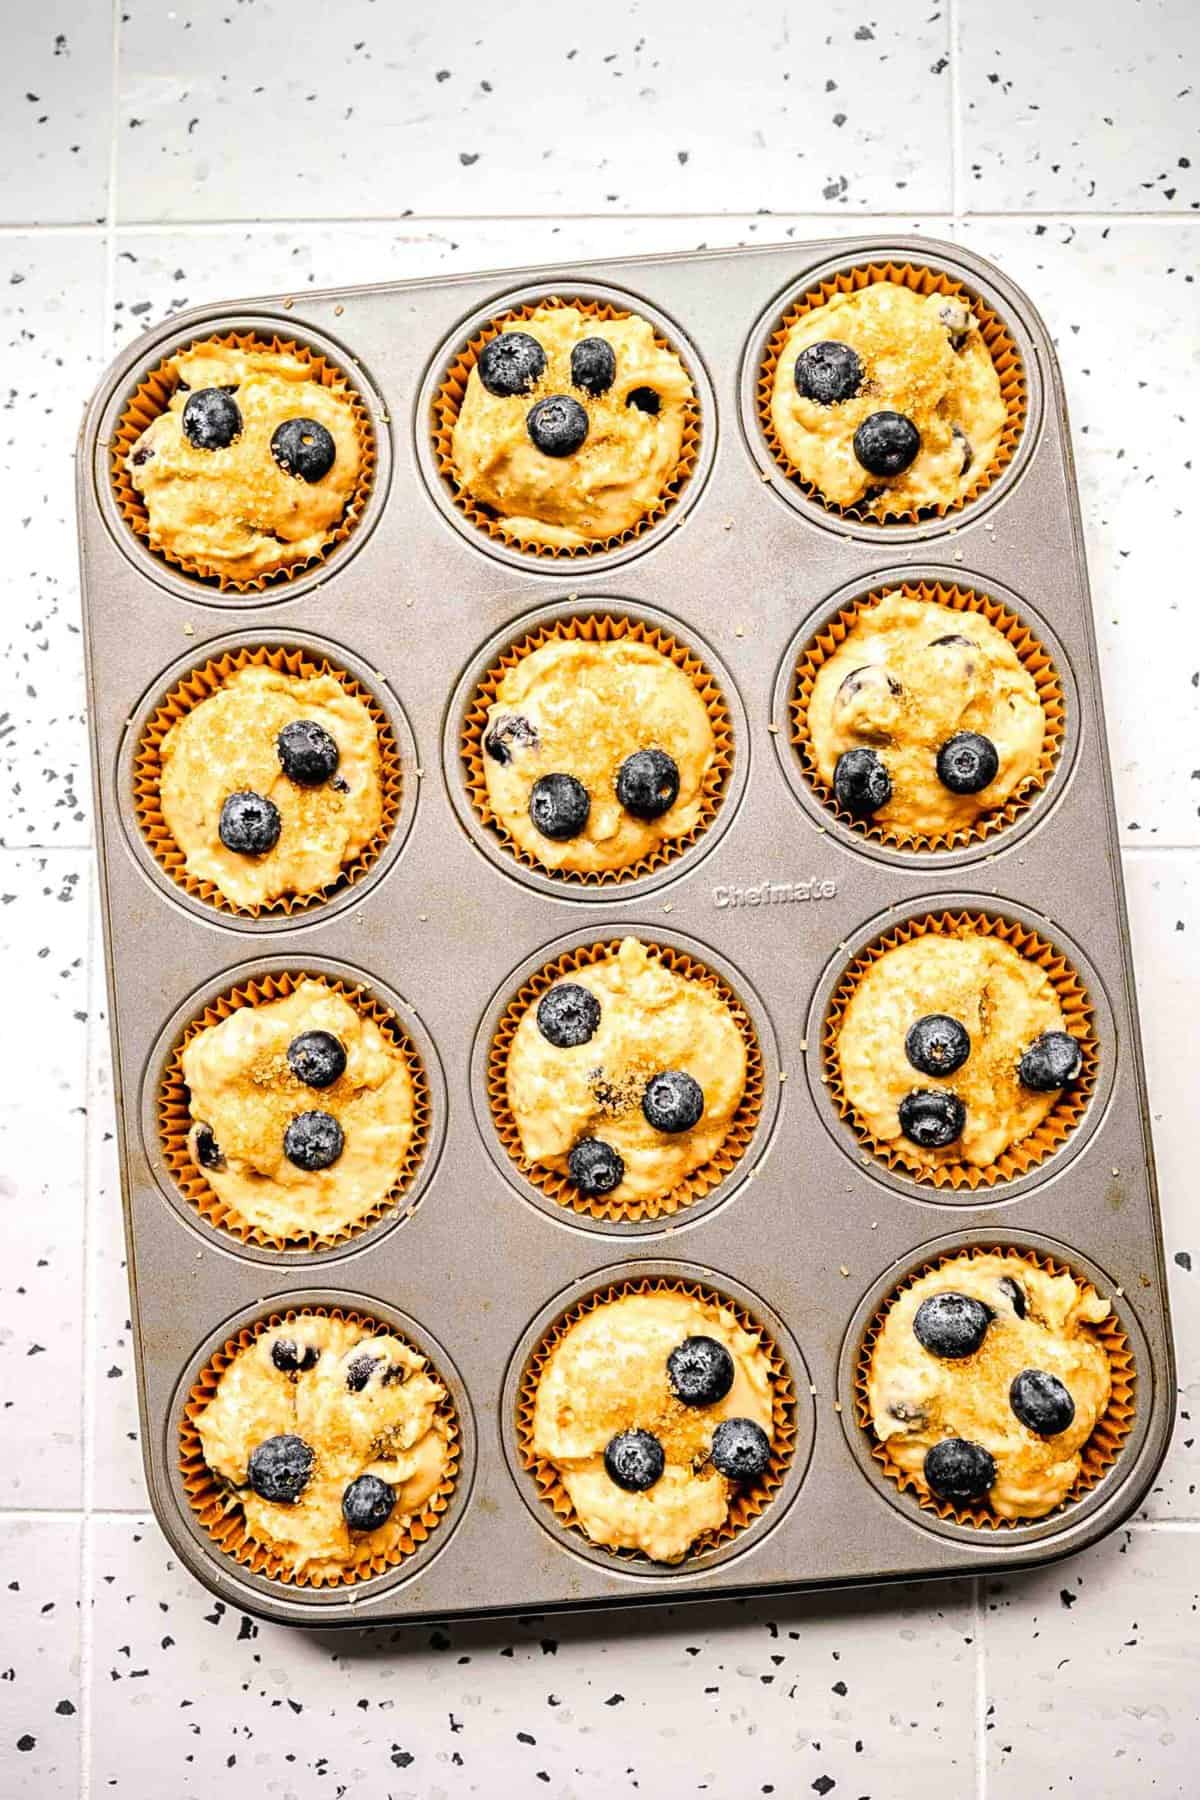 Banana blueberry muffin batter in muffin tins ready to be baked.